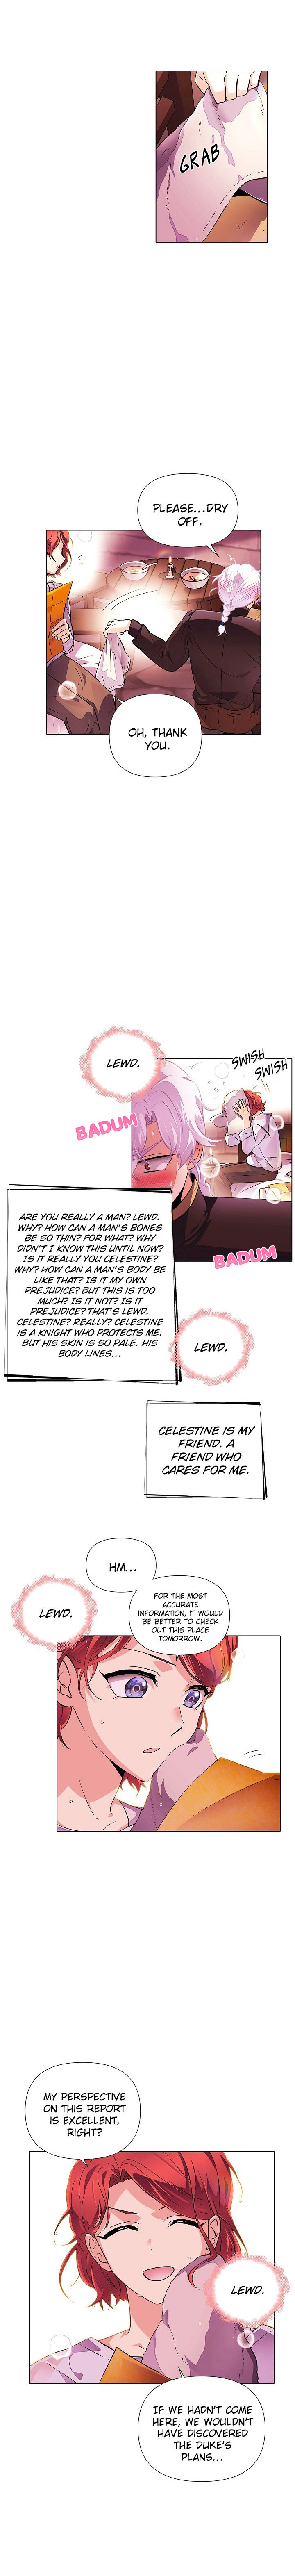 The Villain Discovered My Identity - Chapter 71 Page 6